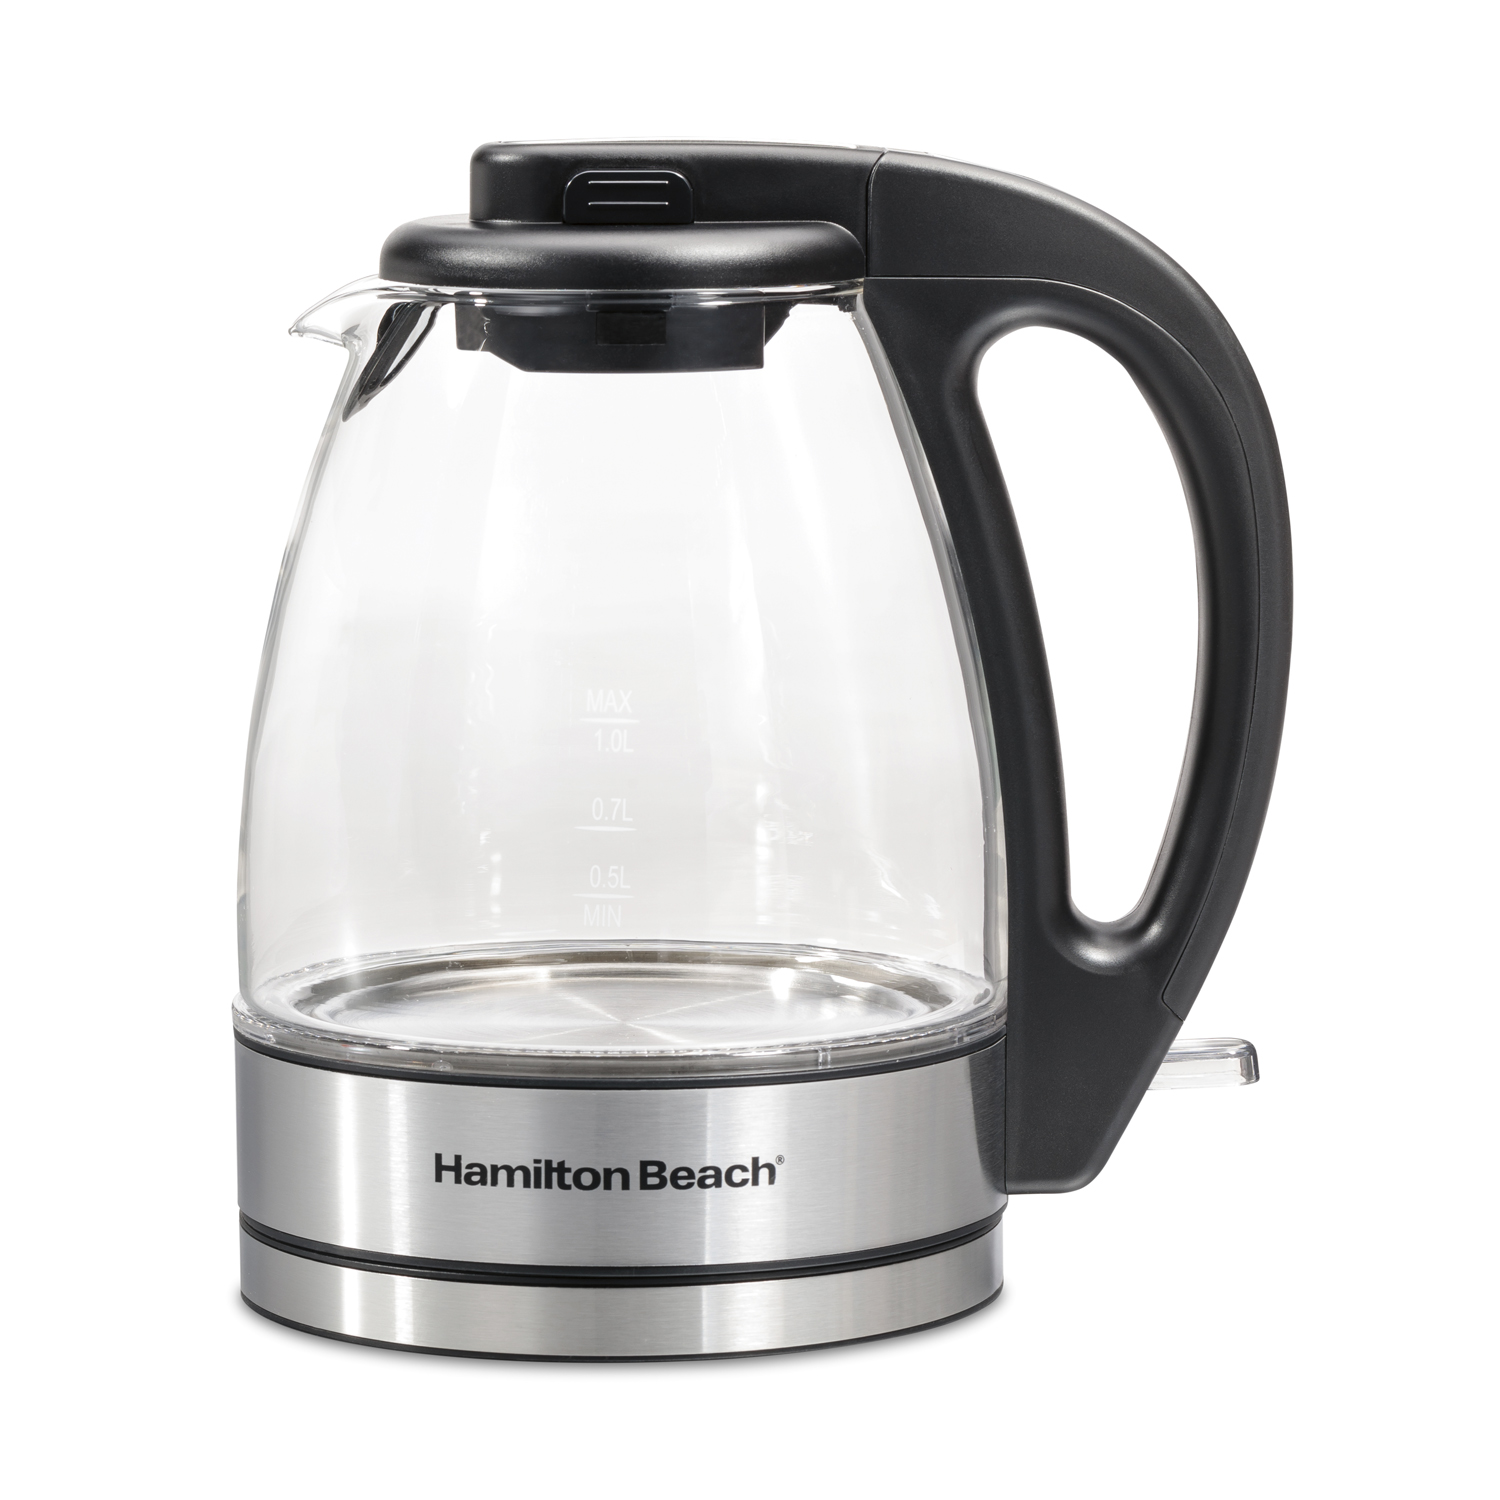  Hamilton Beach 1.7L Electric Tea Kettle, Water Boiler & Heater,  Built-In Mesh Filter, Auto-Shutoff & Boil-Dry Protection, Cordless Serving,  Variable Temp, LED Indicator, Clear Glass (40941R): Home & Kitchen